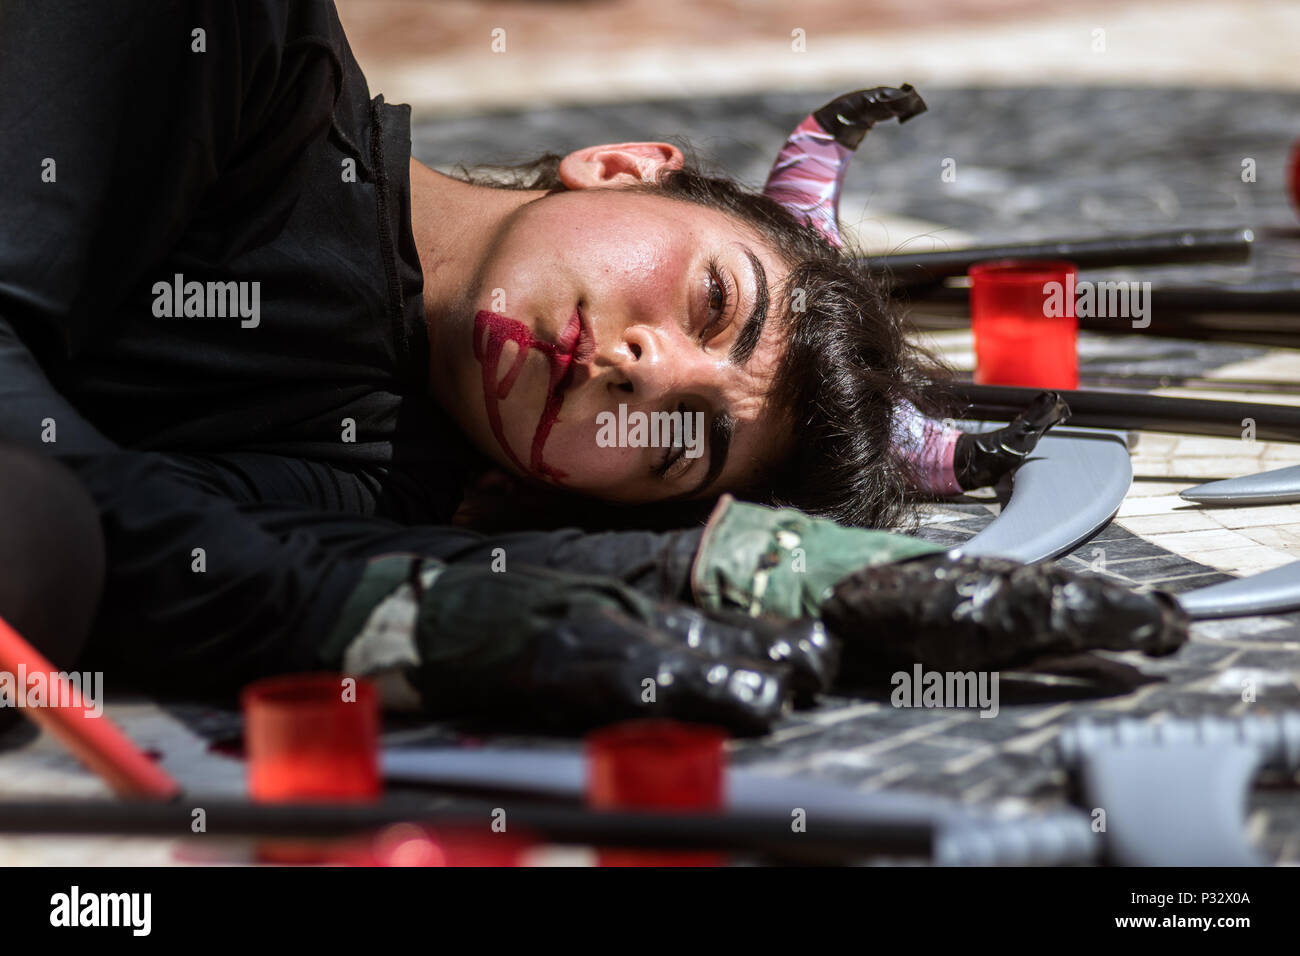 Alicante, Spain. 17th June, 2018. A woman lays on the floor with fake blood in her mouth during a performance where anti-bullfighting protesters demand the abolishment of bullfighting and animal suffering, in Alicante, Spain. Credit: Marcos del Mazo/Alamy Live News Stock Photo